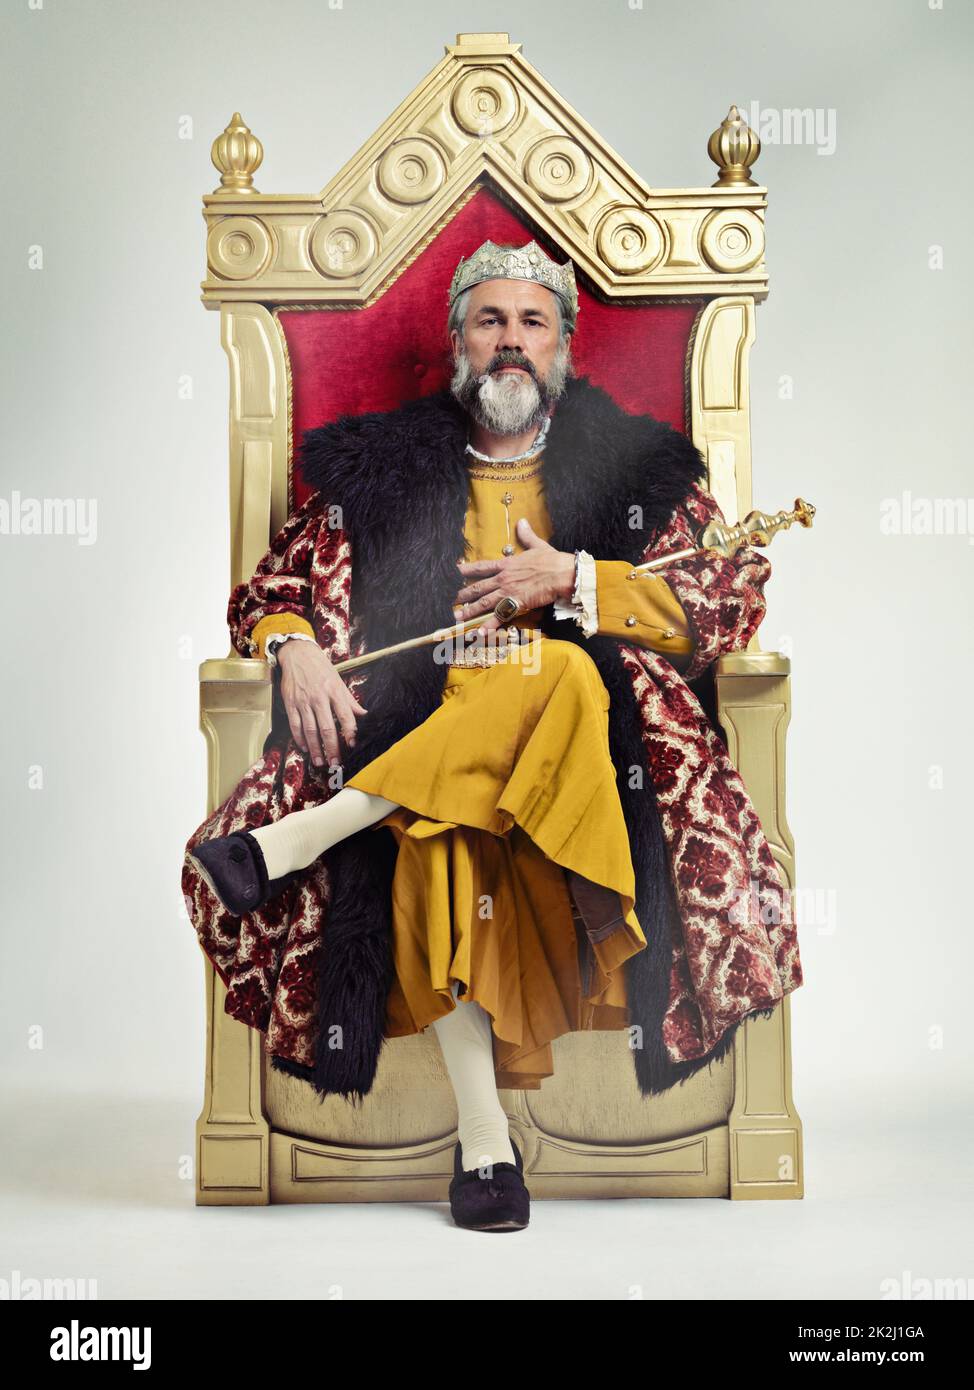 I took the throne peacefully. Studio shot of a richly garbed king sitting on a throne. Stock Photo